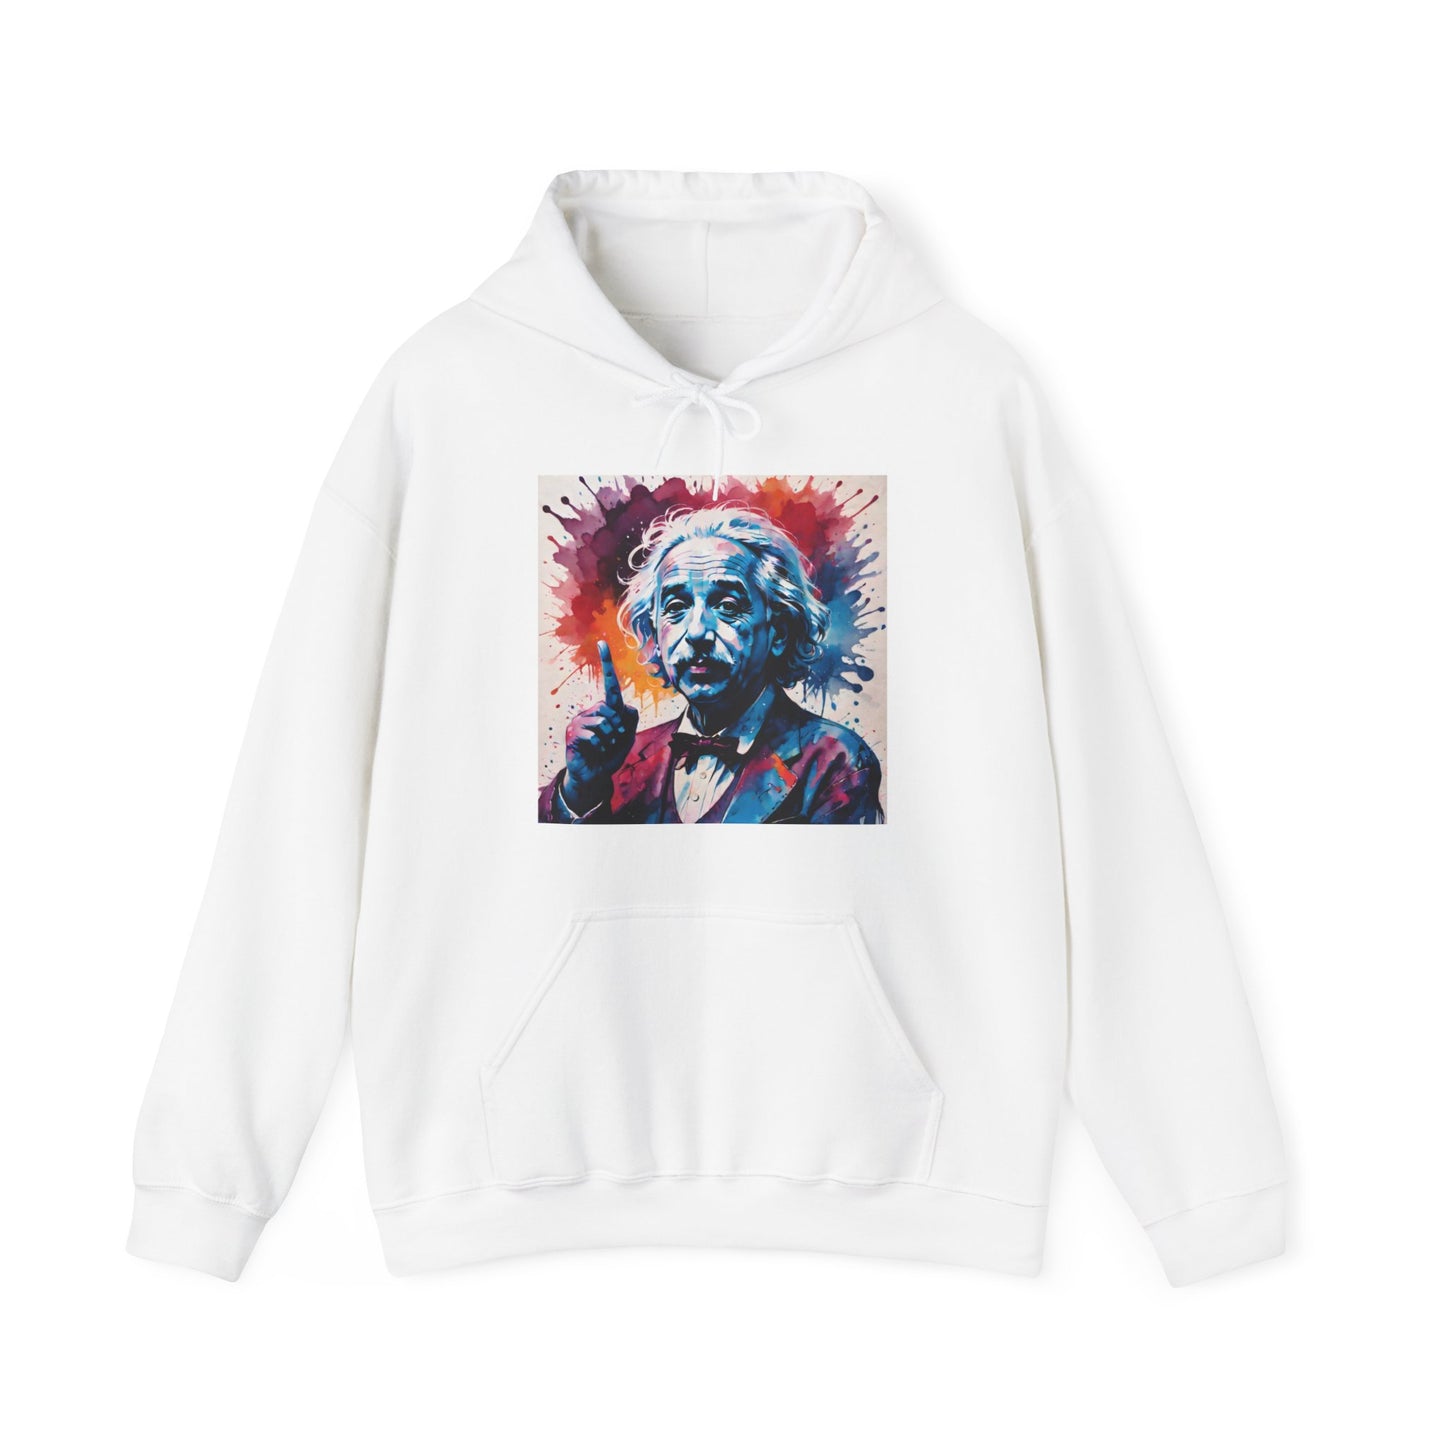 "The theory of everything" Single Print Unisex Heavy Blend™ Hooded Sweatshirt